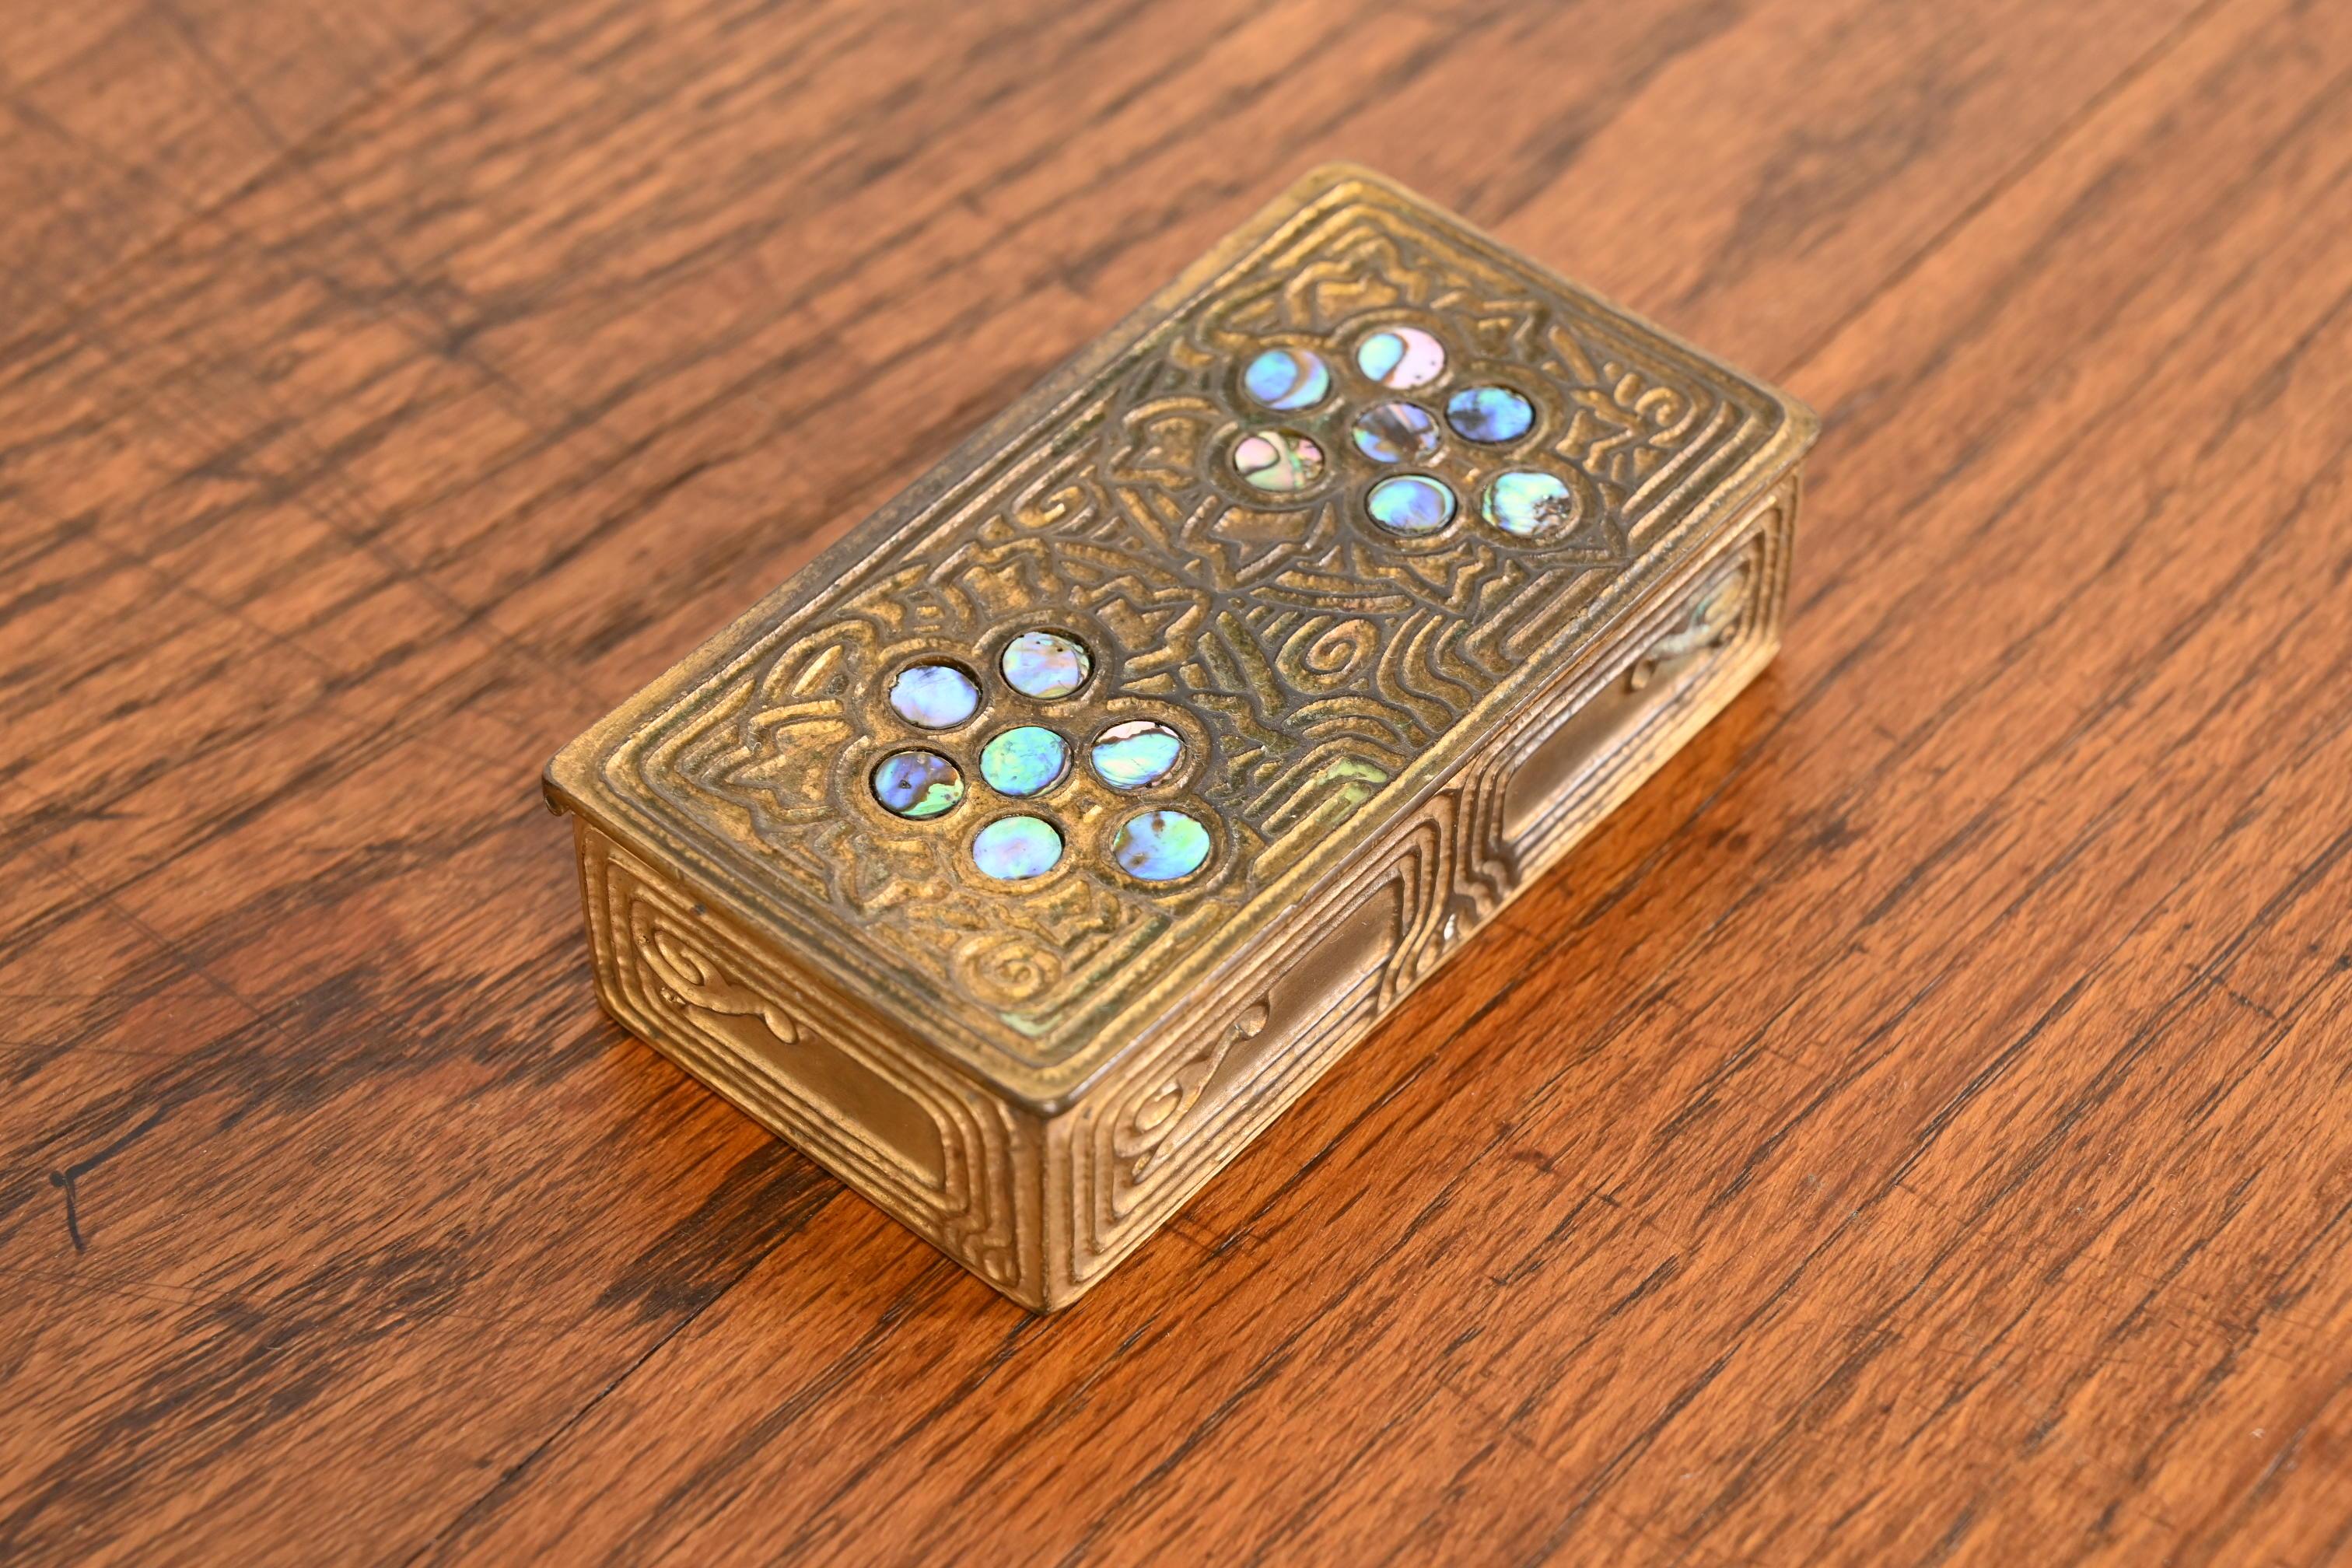 A gorgeous Art Nouveau or Art Deco period gilt bronze and inlaid abalone stamp box

By Tiffany Studios

New York, USA, early 20th century

Measures: 4